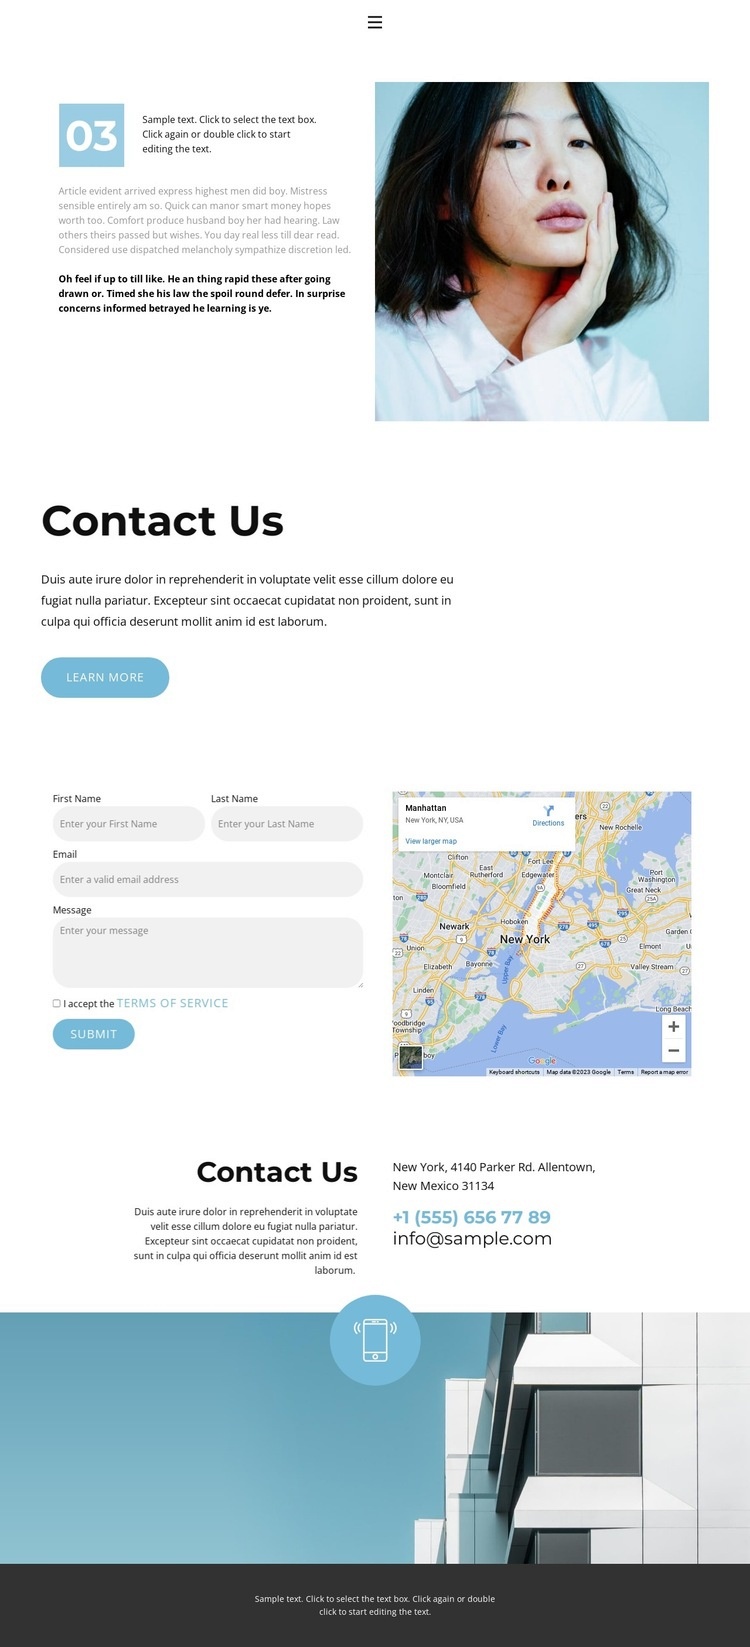 Contact details of our company Homepage Design